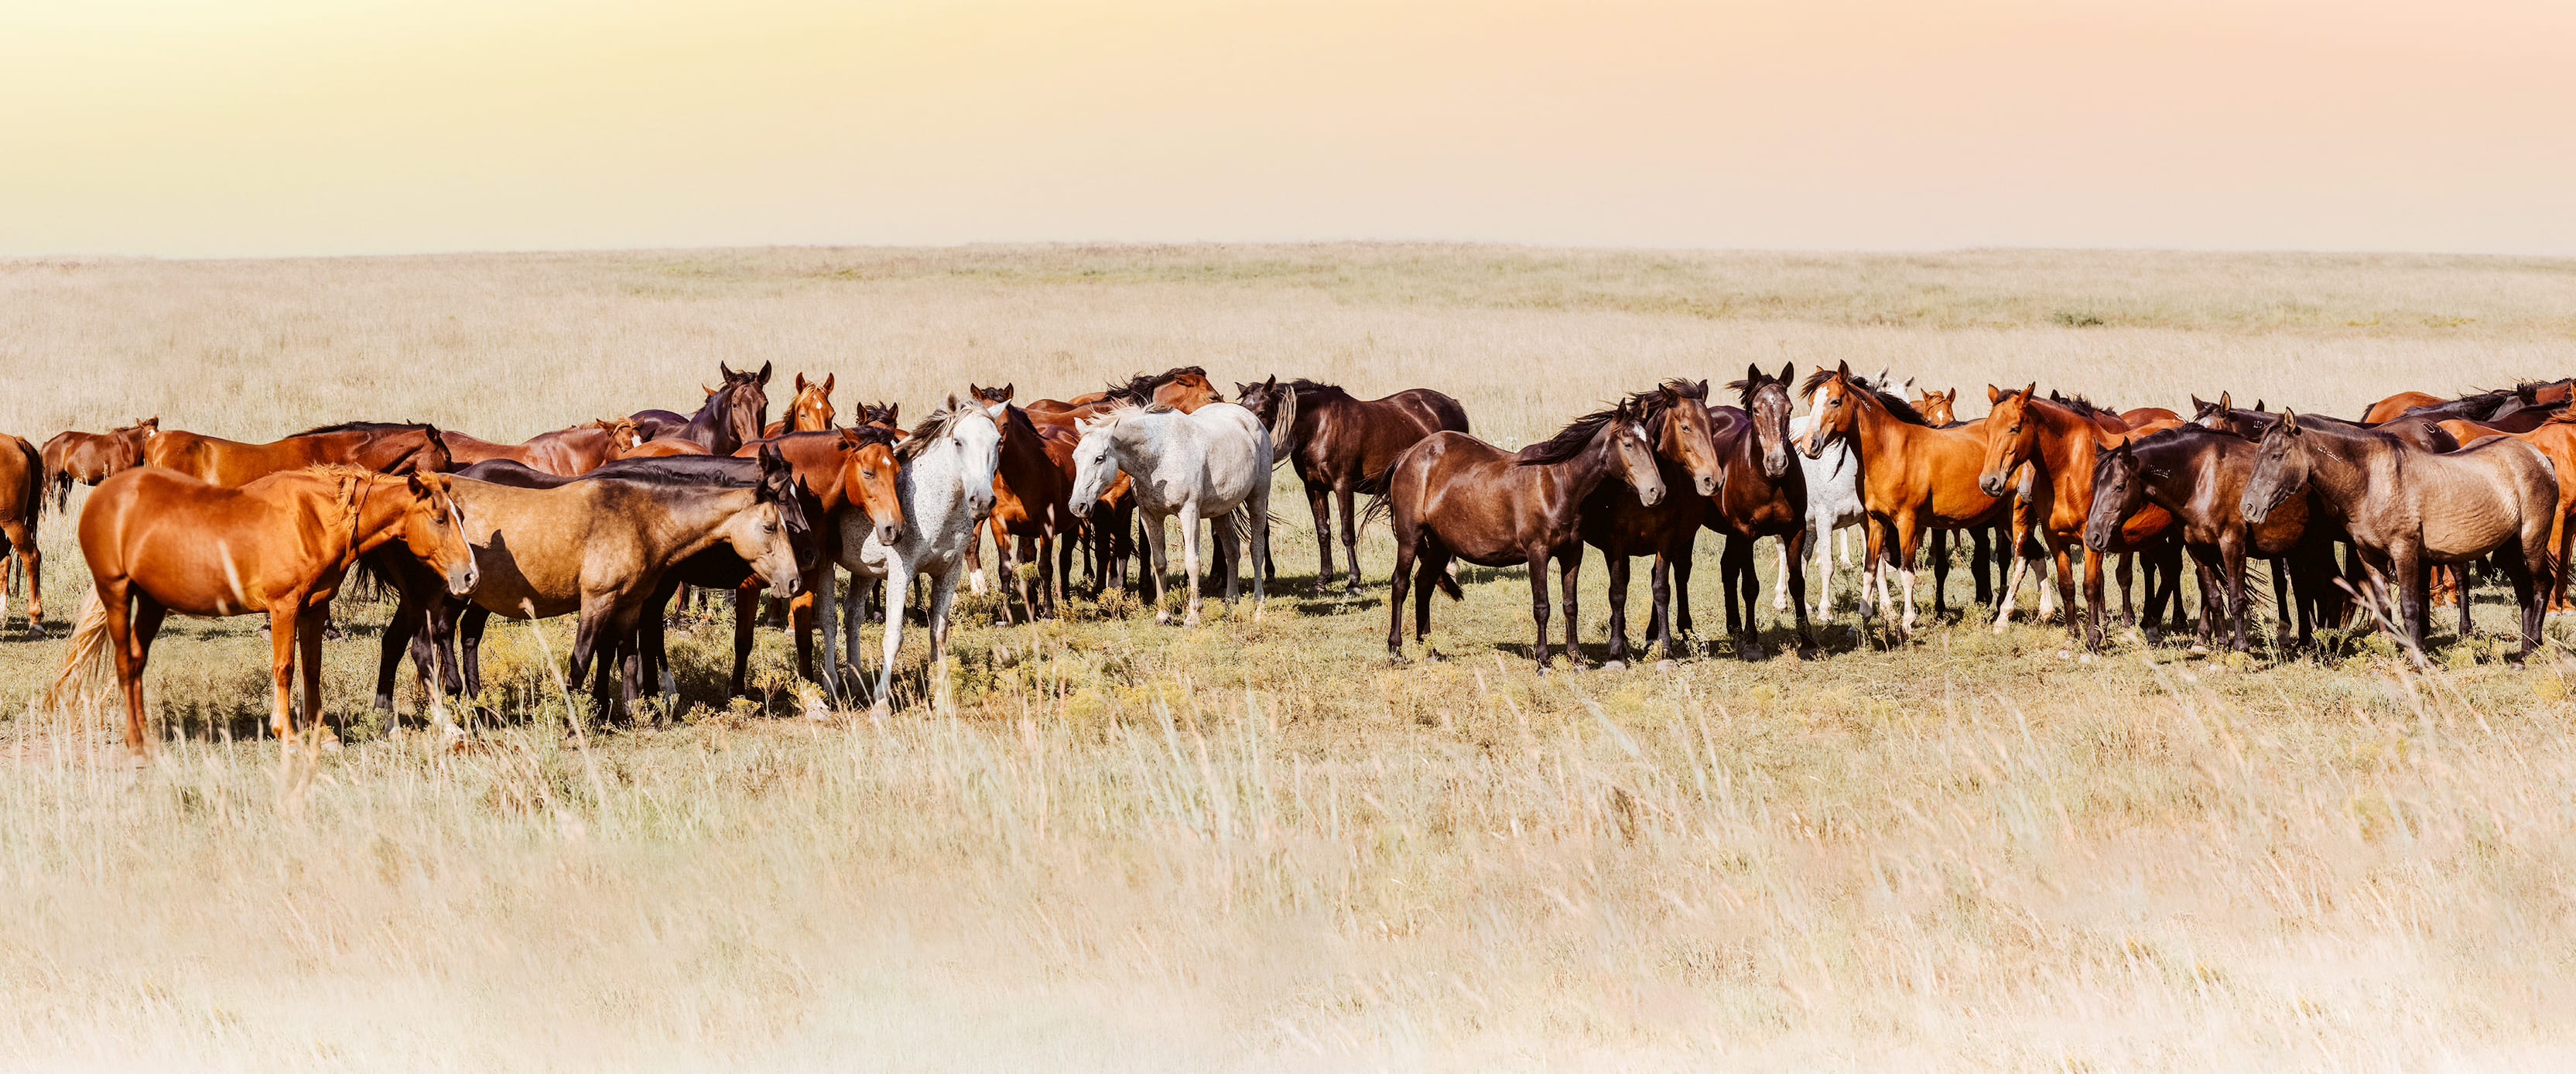 Horse panoramic canvas wall art for western or rustic decor.